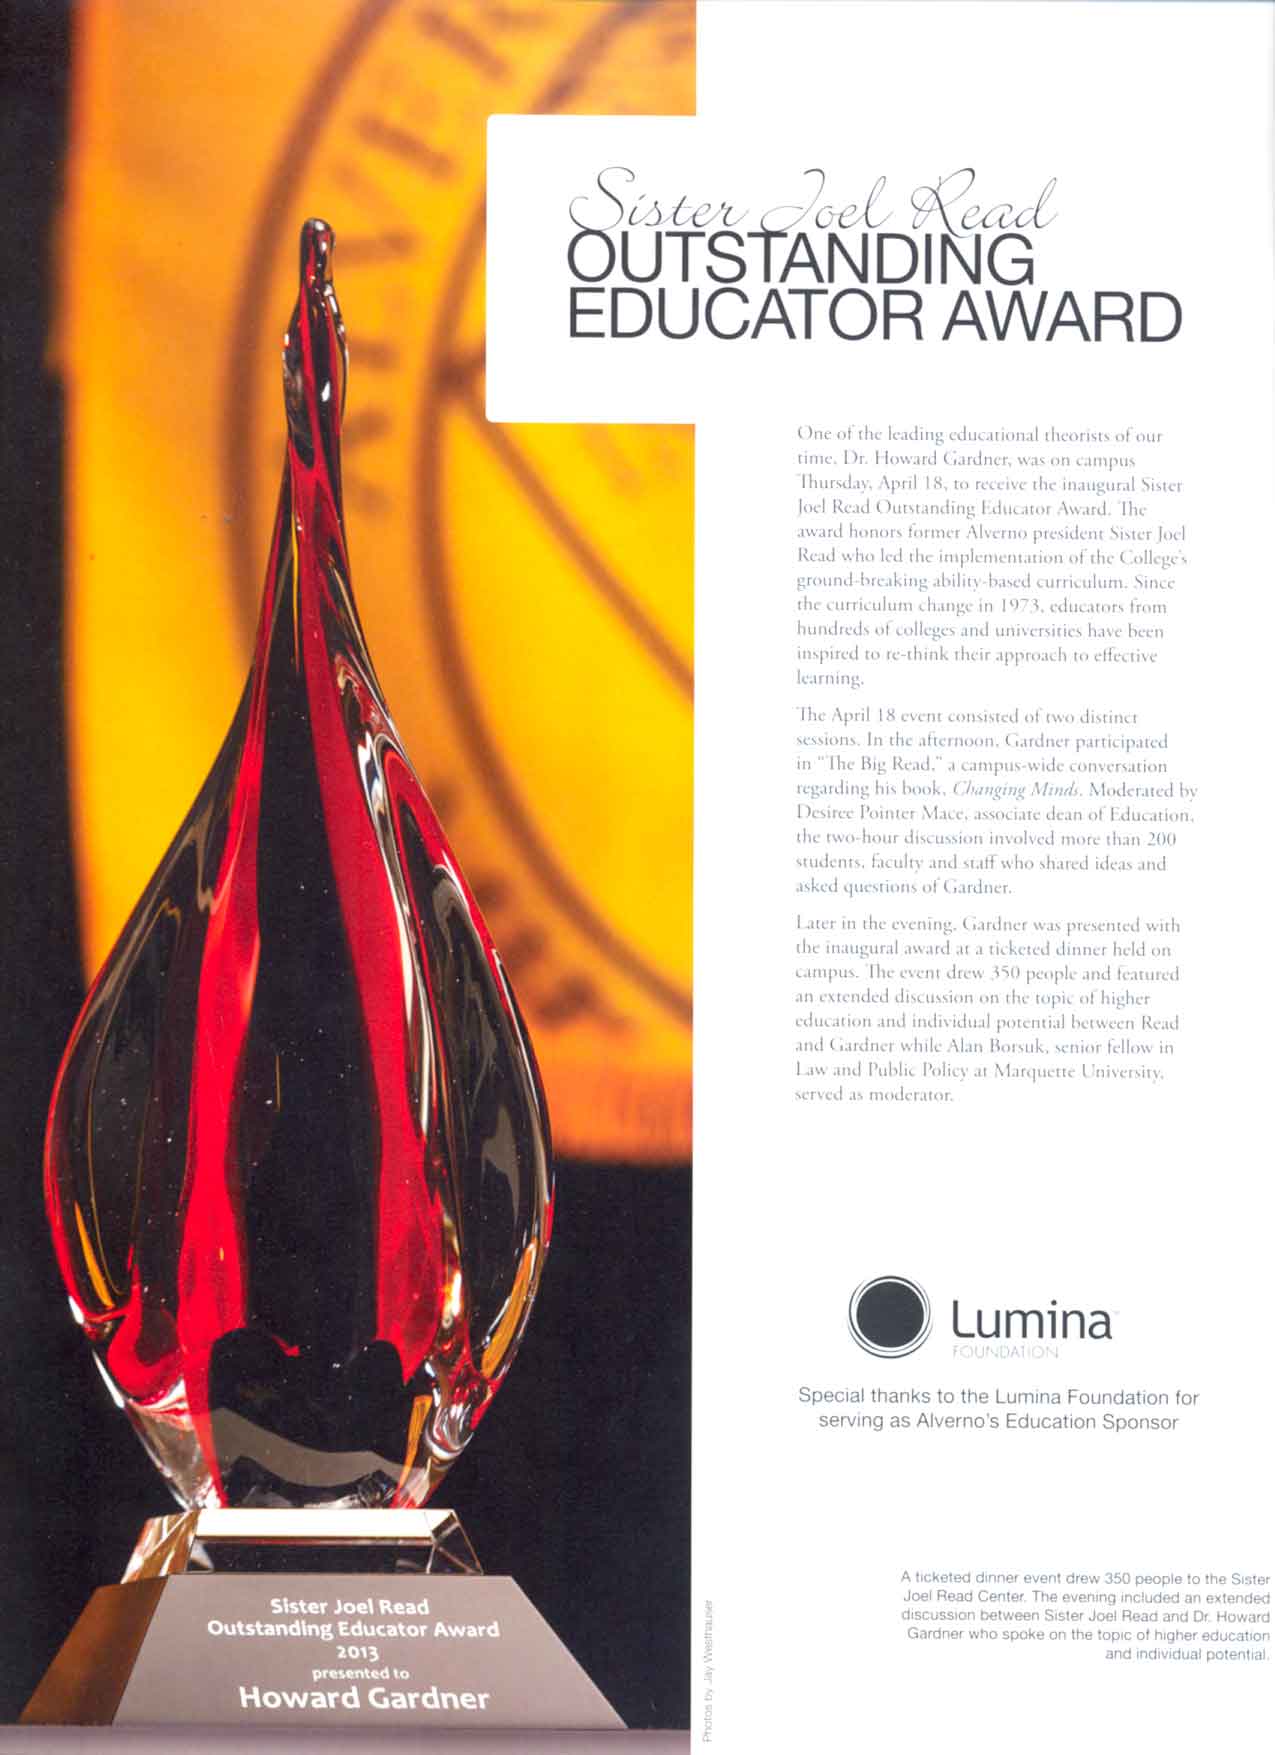 Sister Joel REad Outstanding Educator Award article from Fall 2013 issue Alverno Magazine p.4